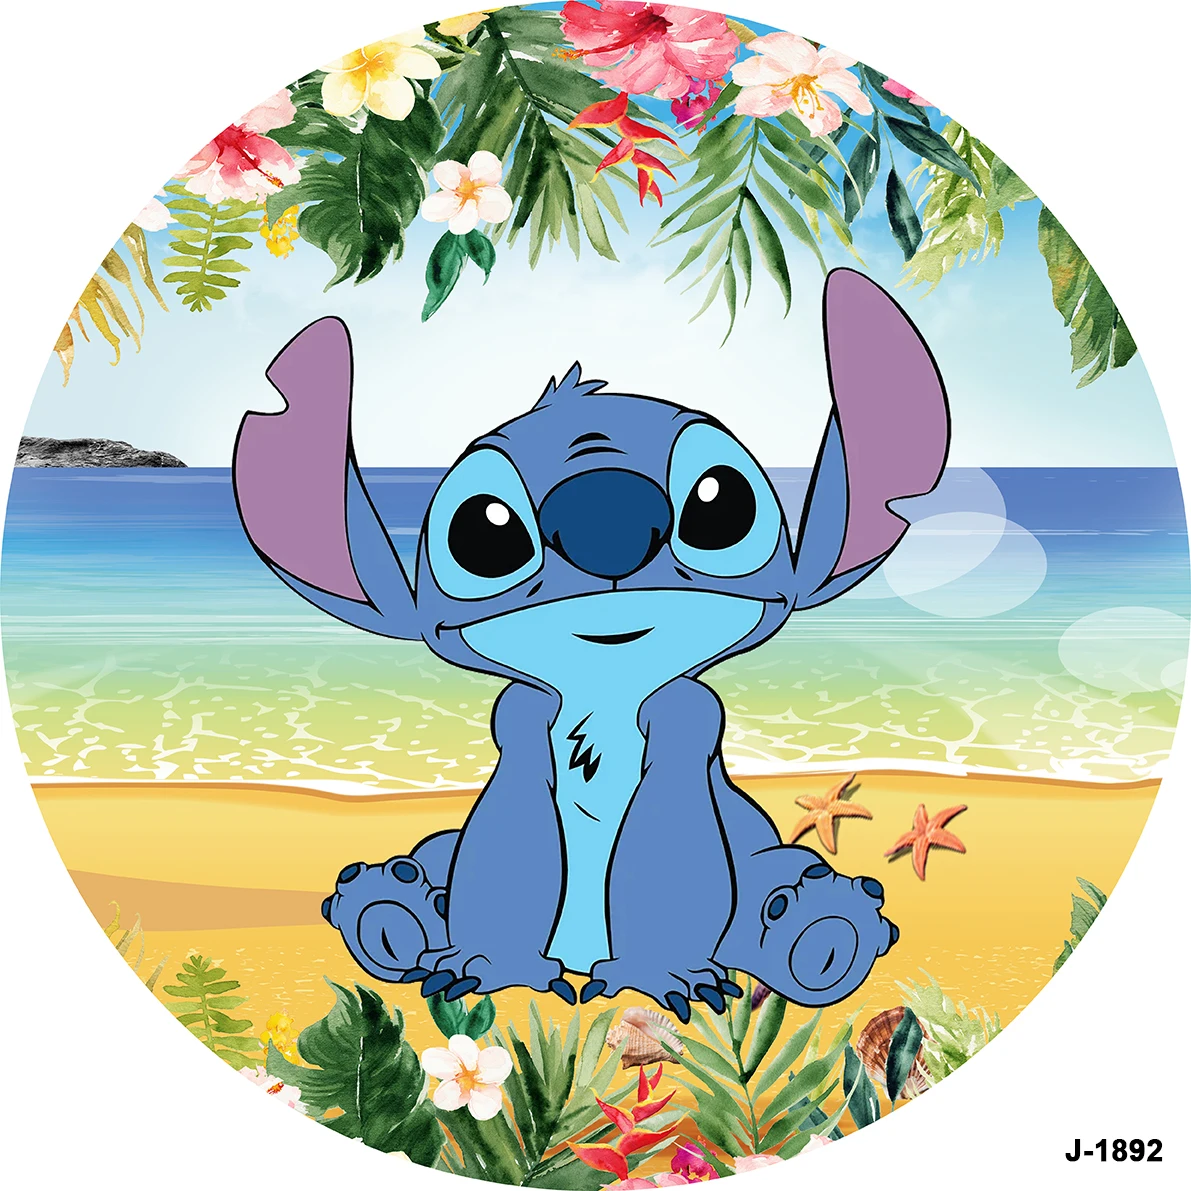 

Customized Round Circle Fabric Backdrop with Elastic Disney Lilo & Stitch Theme Birthday Party Background Decorations Supplies